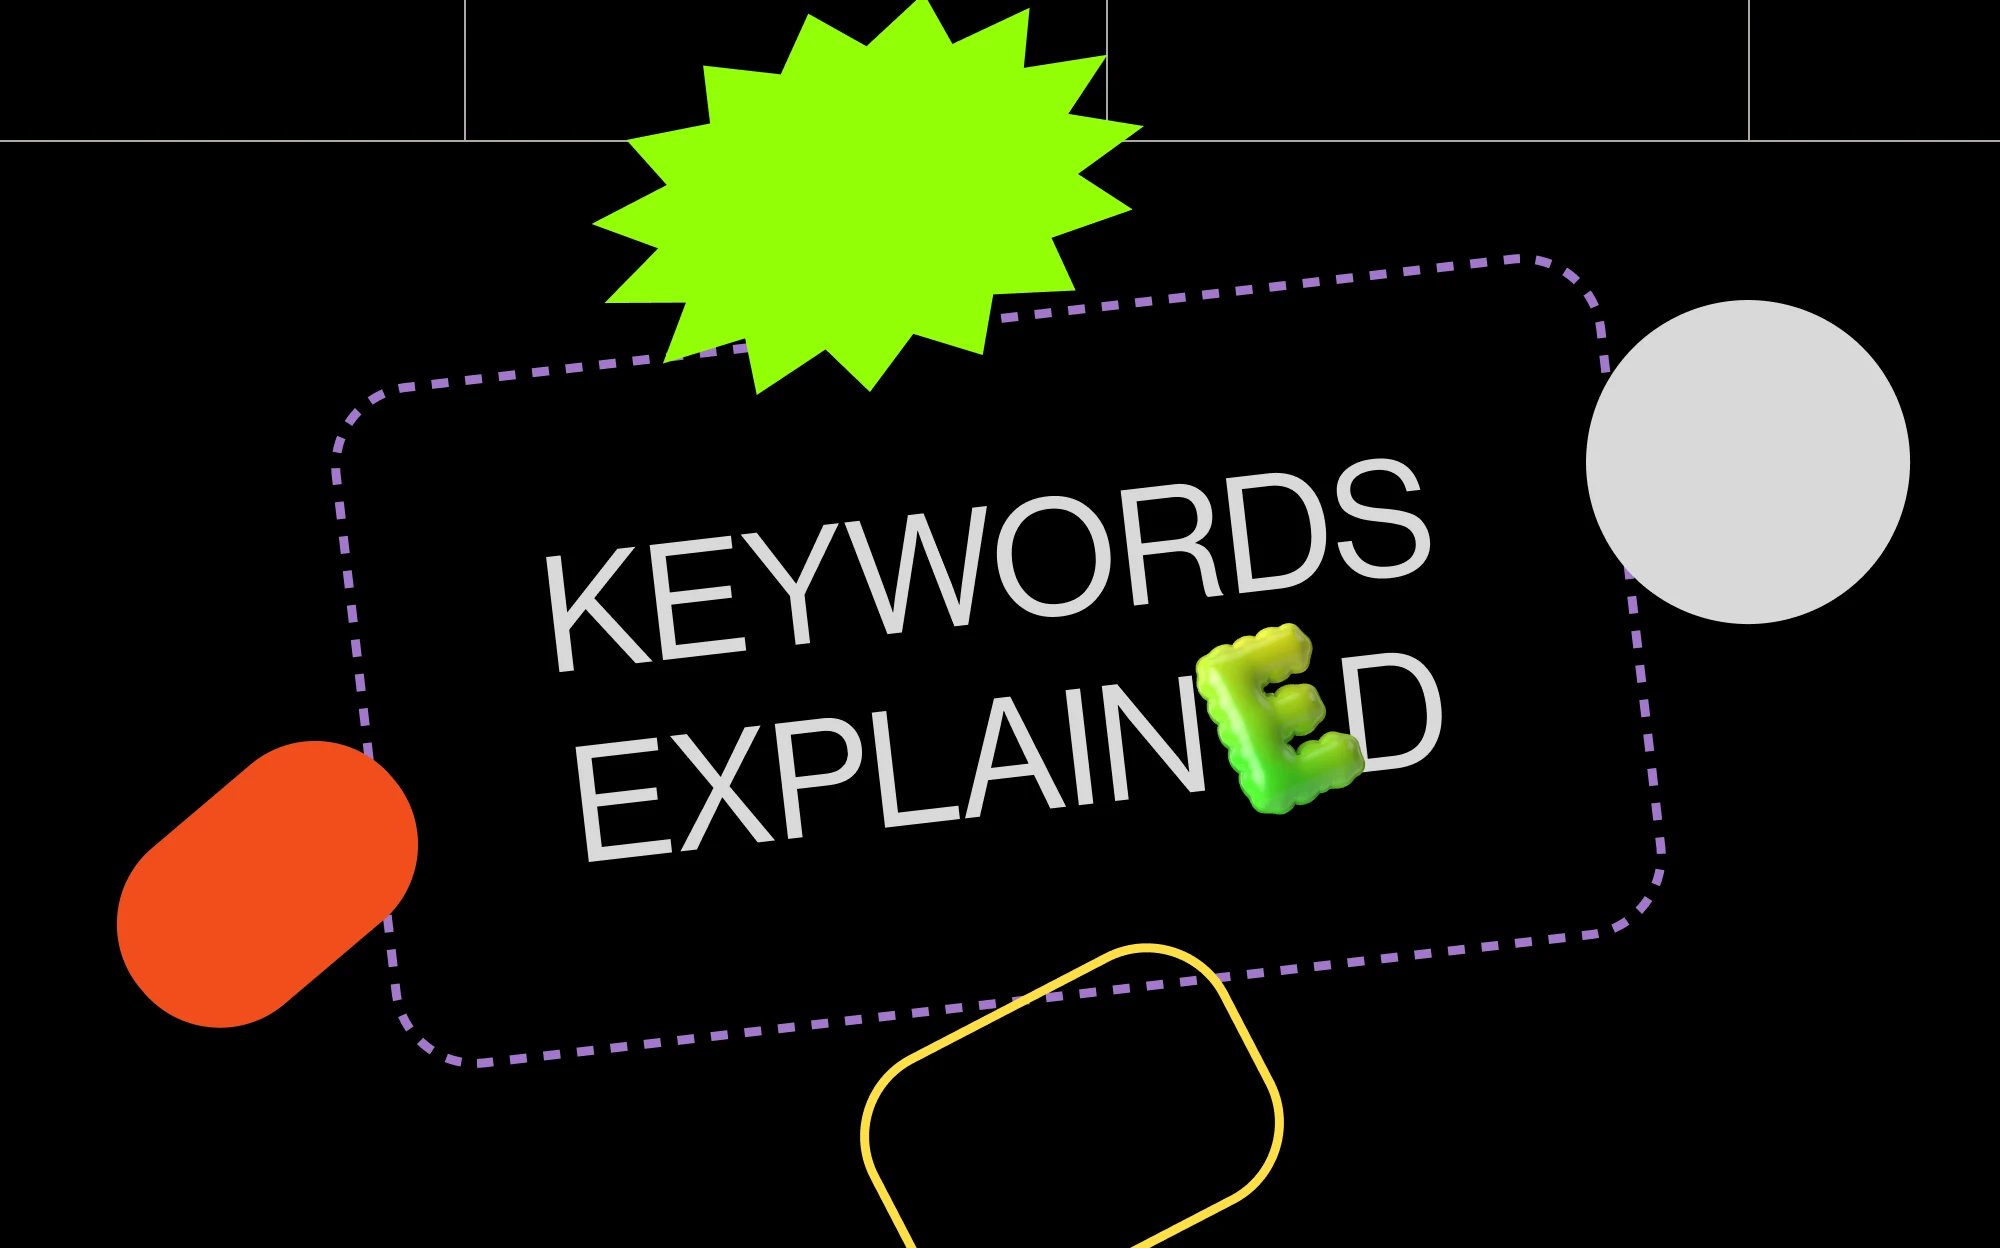 What are keywords?